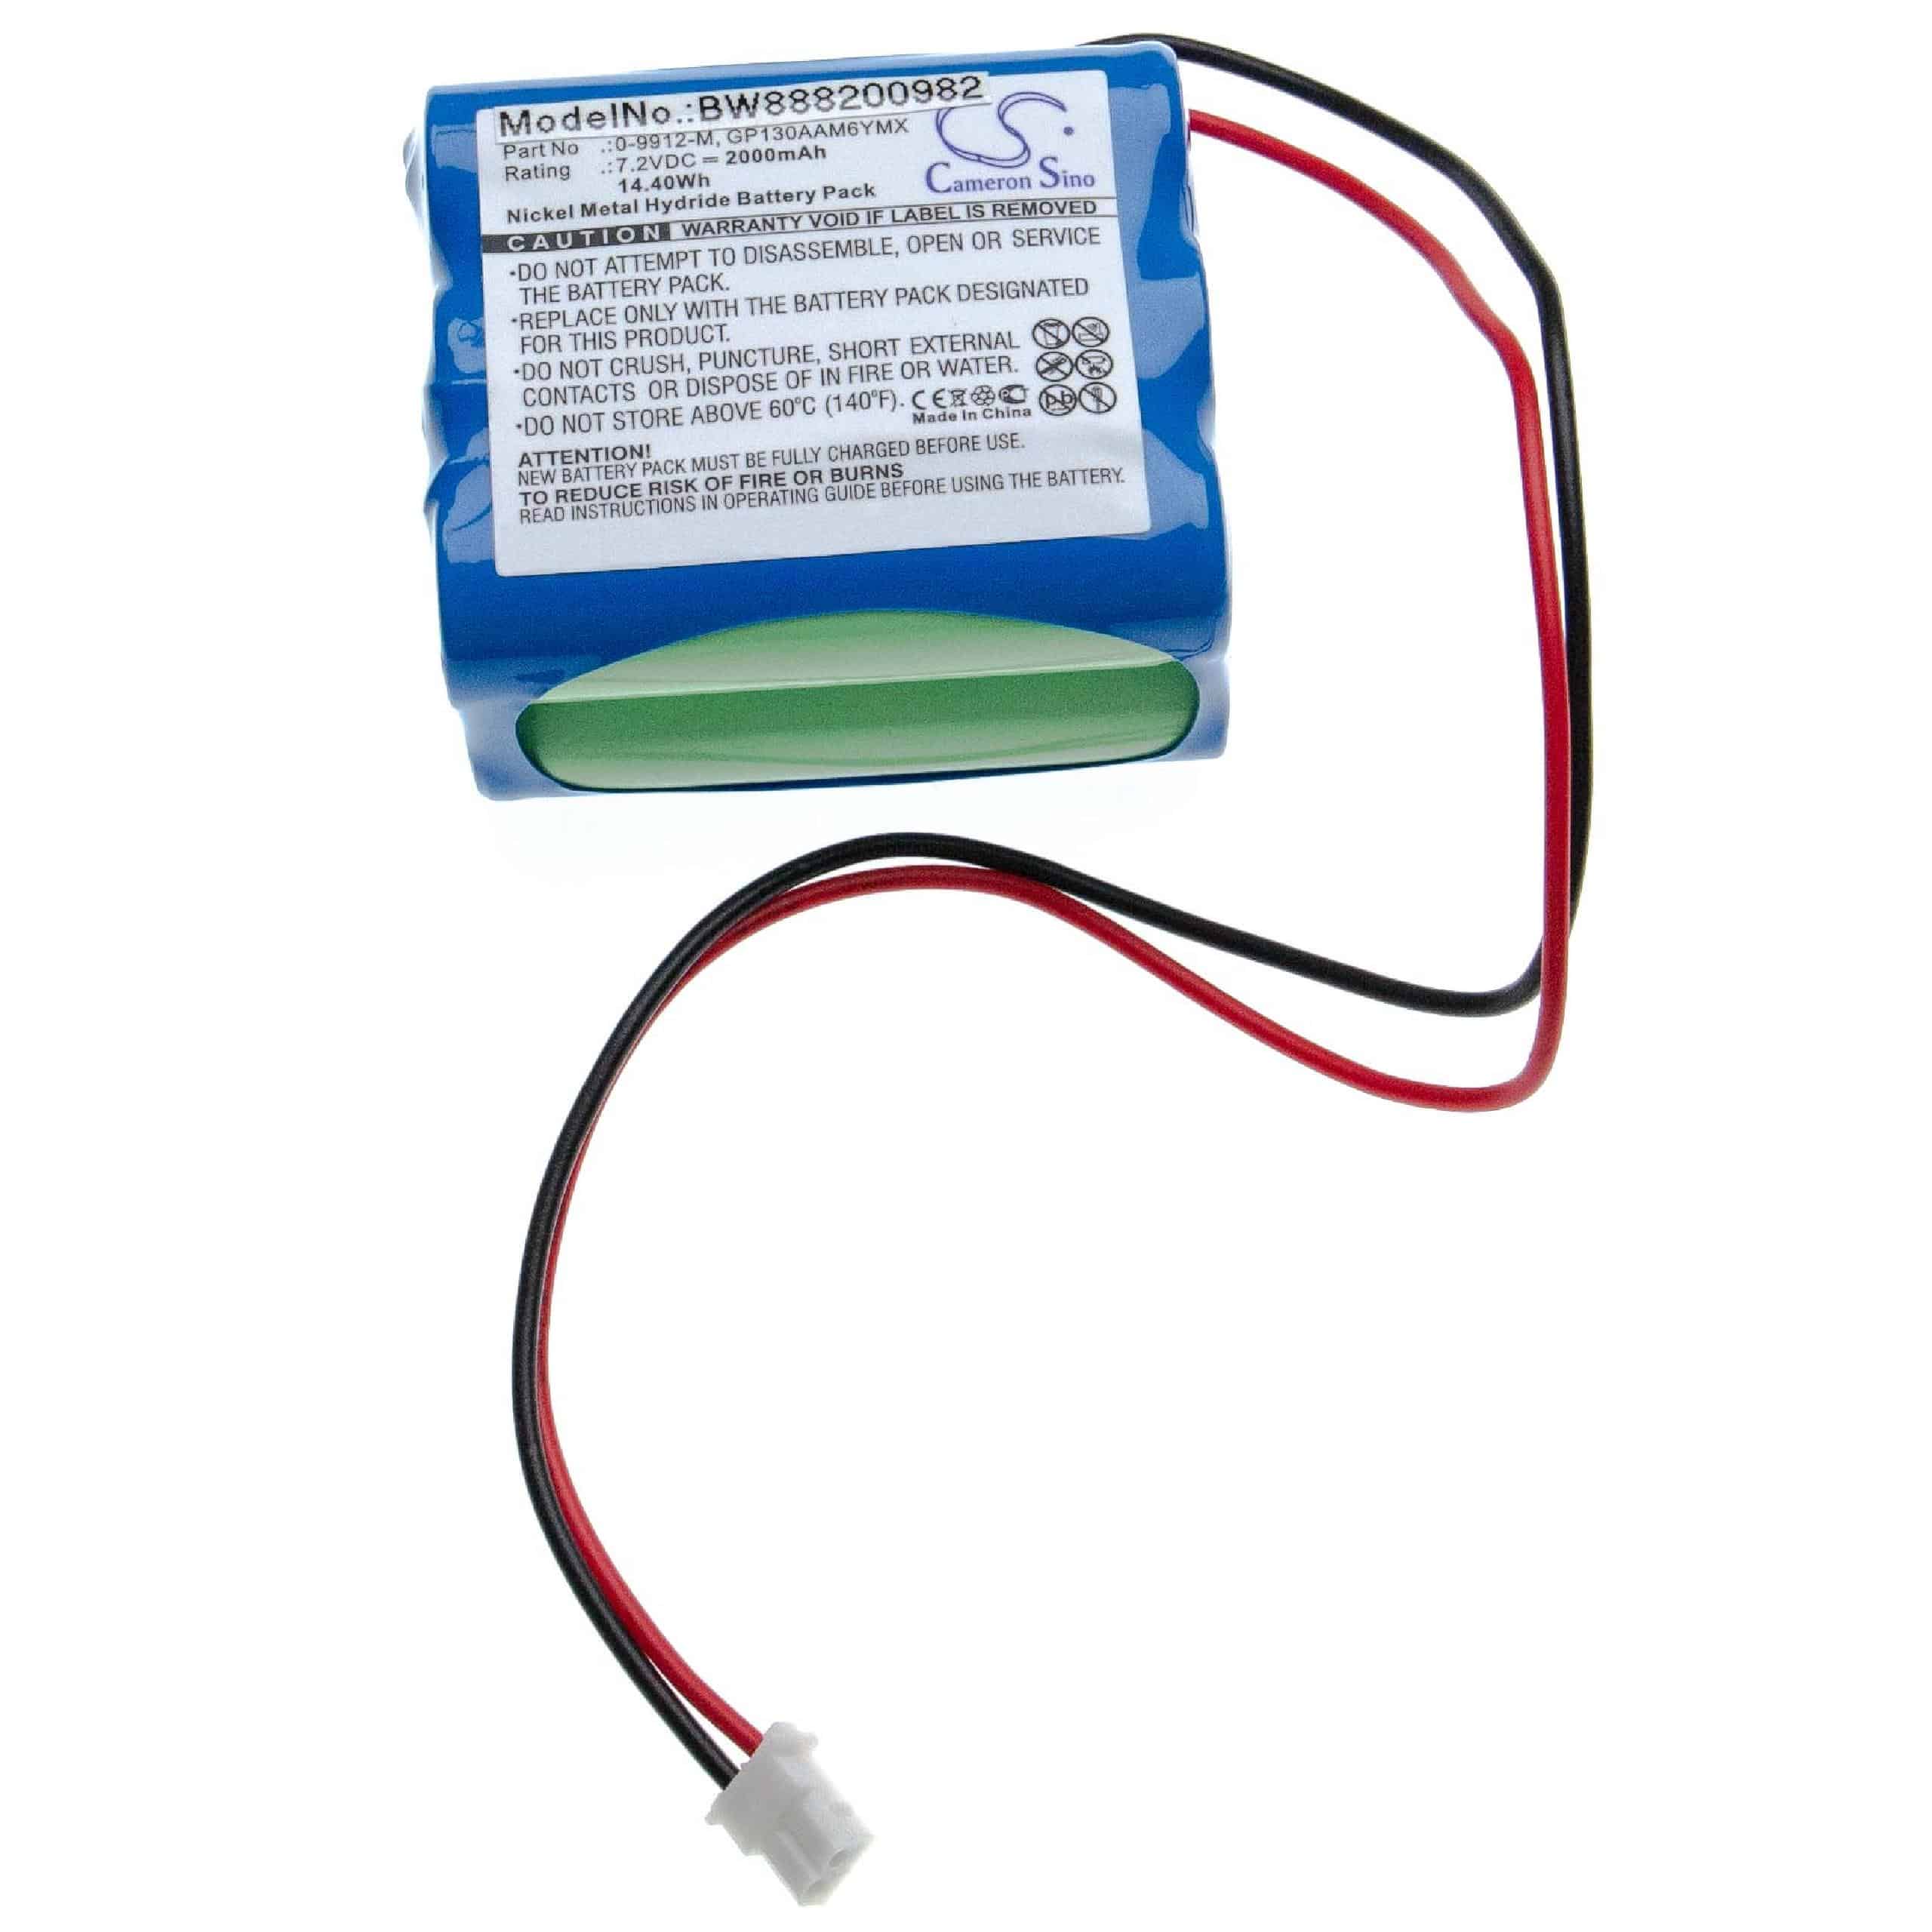 Alarm System Battery Replacement for BT GP100AAS6YMX, GP130AAM6YMX, GP220AAM6YMX - 2000mAh 7.2V NiMH